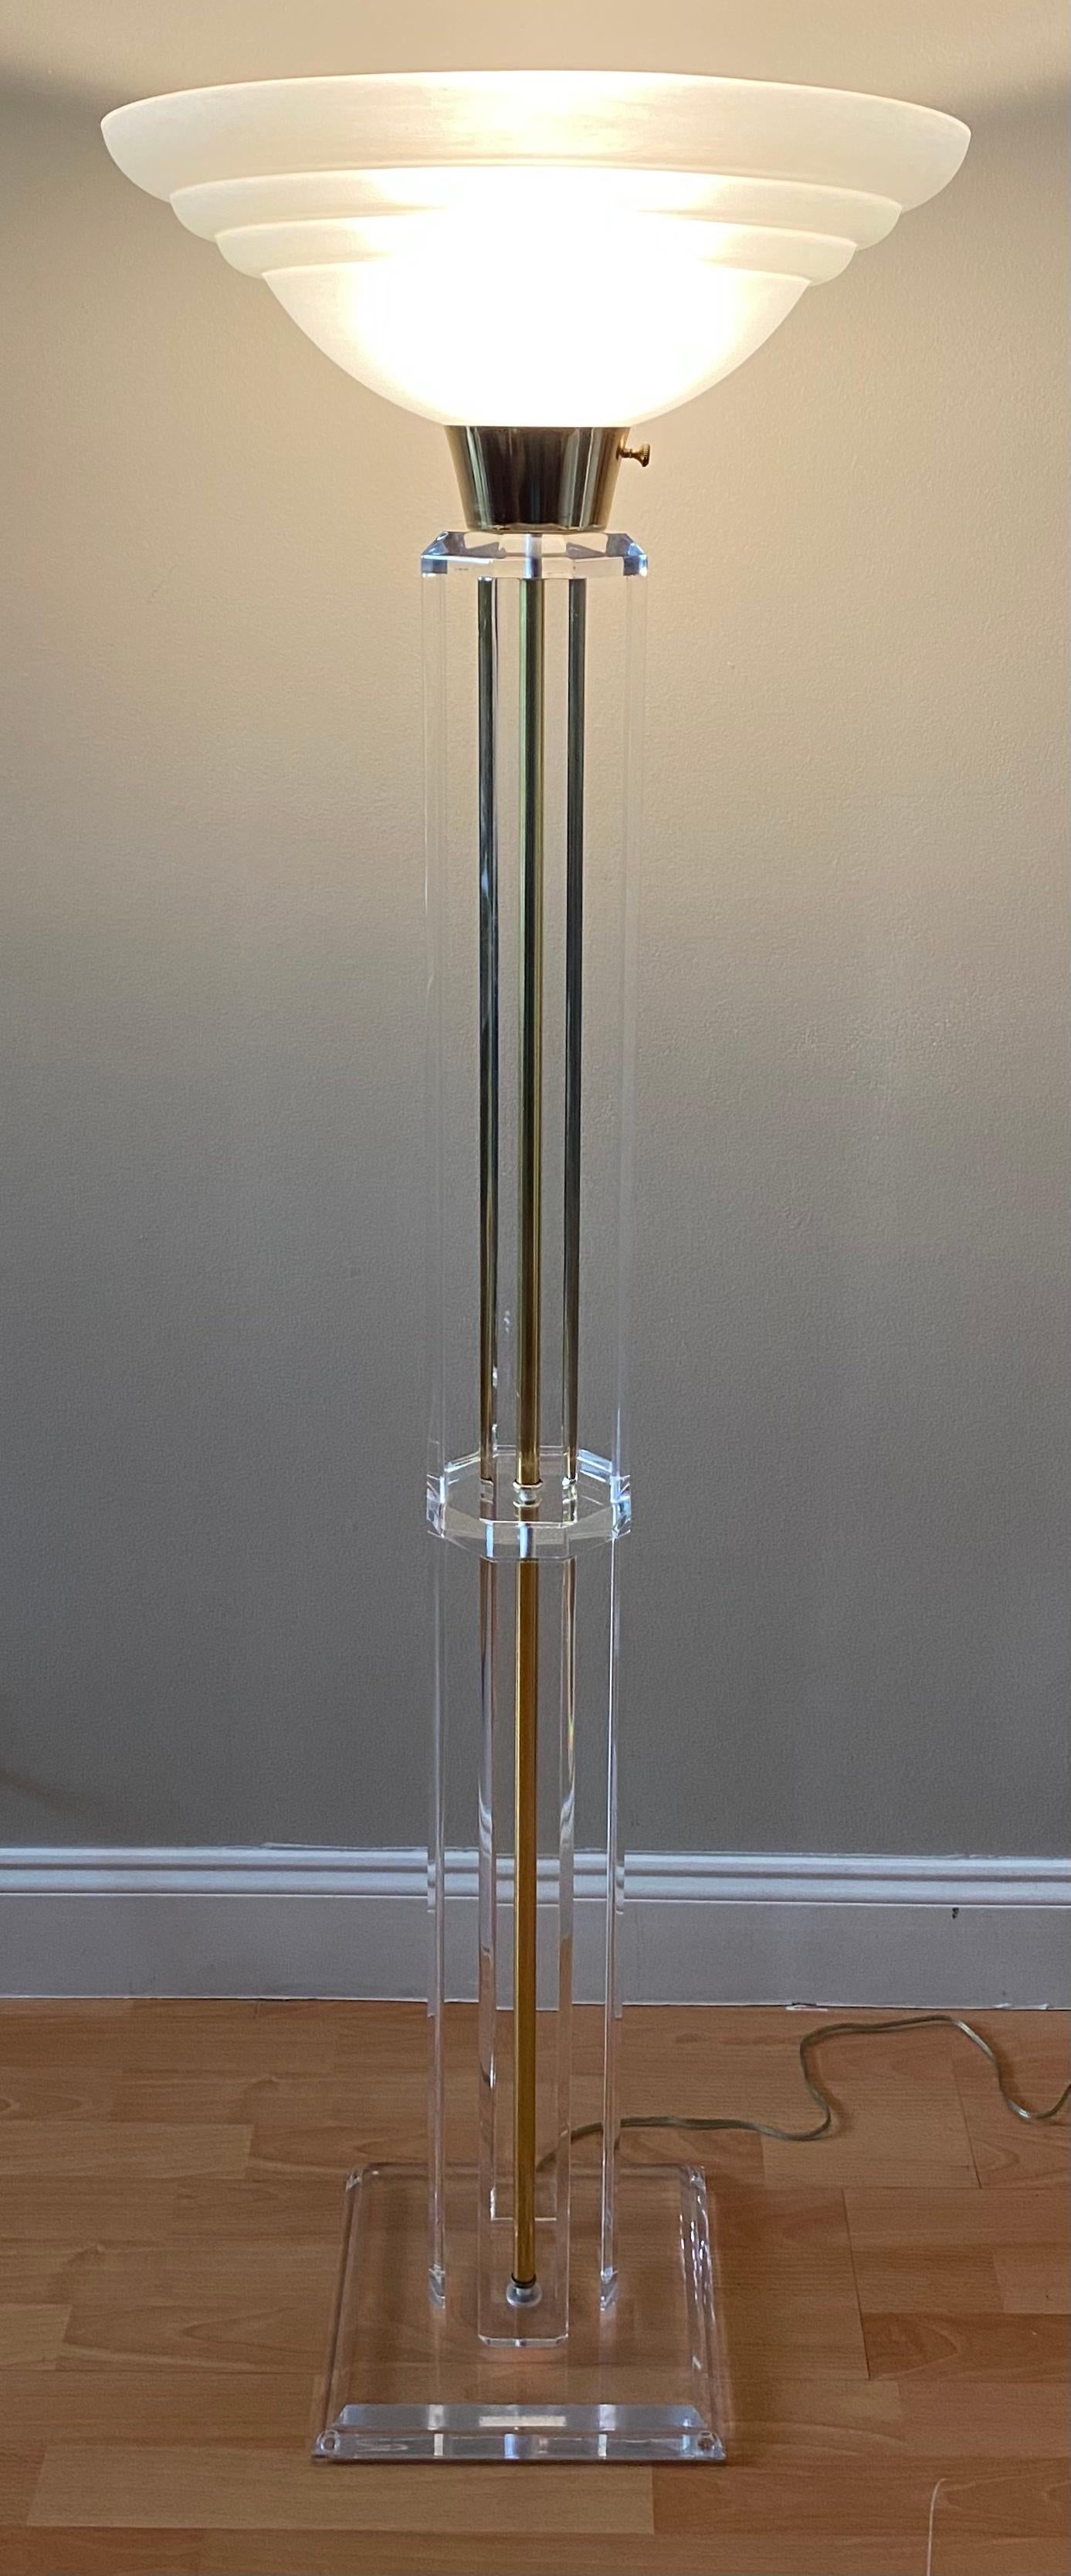 Stylish floor lamp in lucite and brass in the style of pieces designed by the lucite icon, Charles Hollis Jones.

This beautiful lamp is part of lines designed in the 1970s.  It is in very good condition and proper working order that illuminates